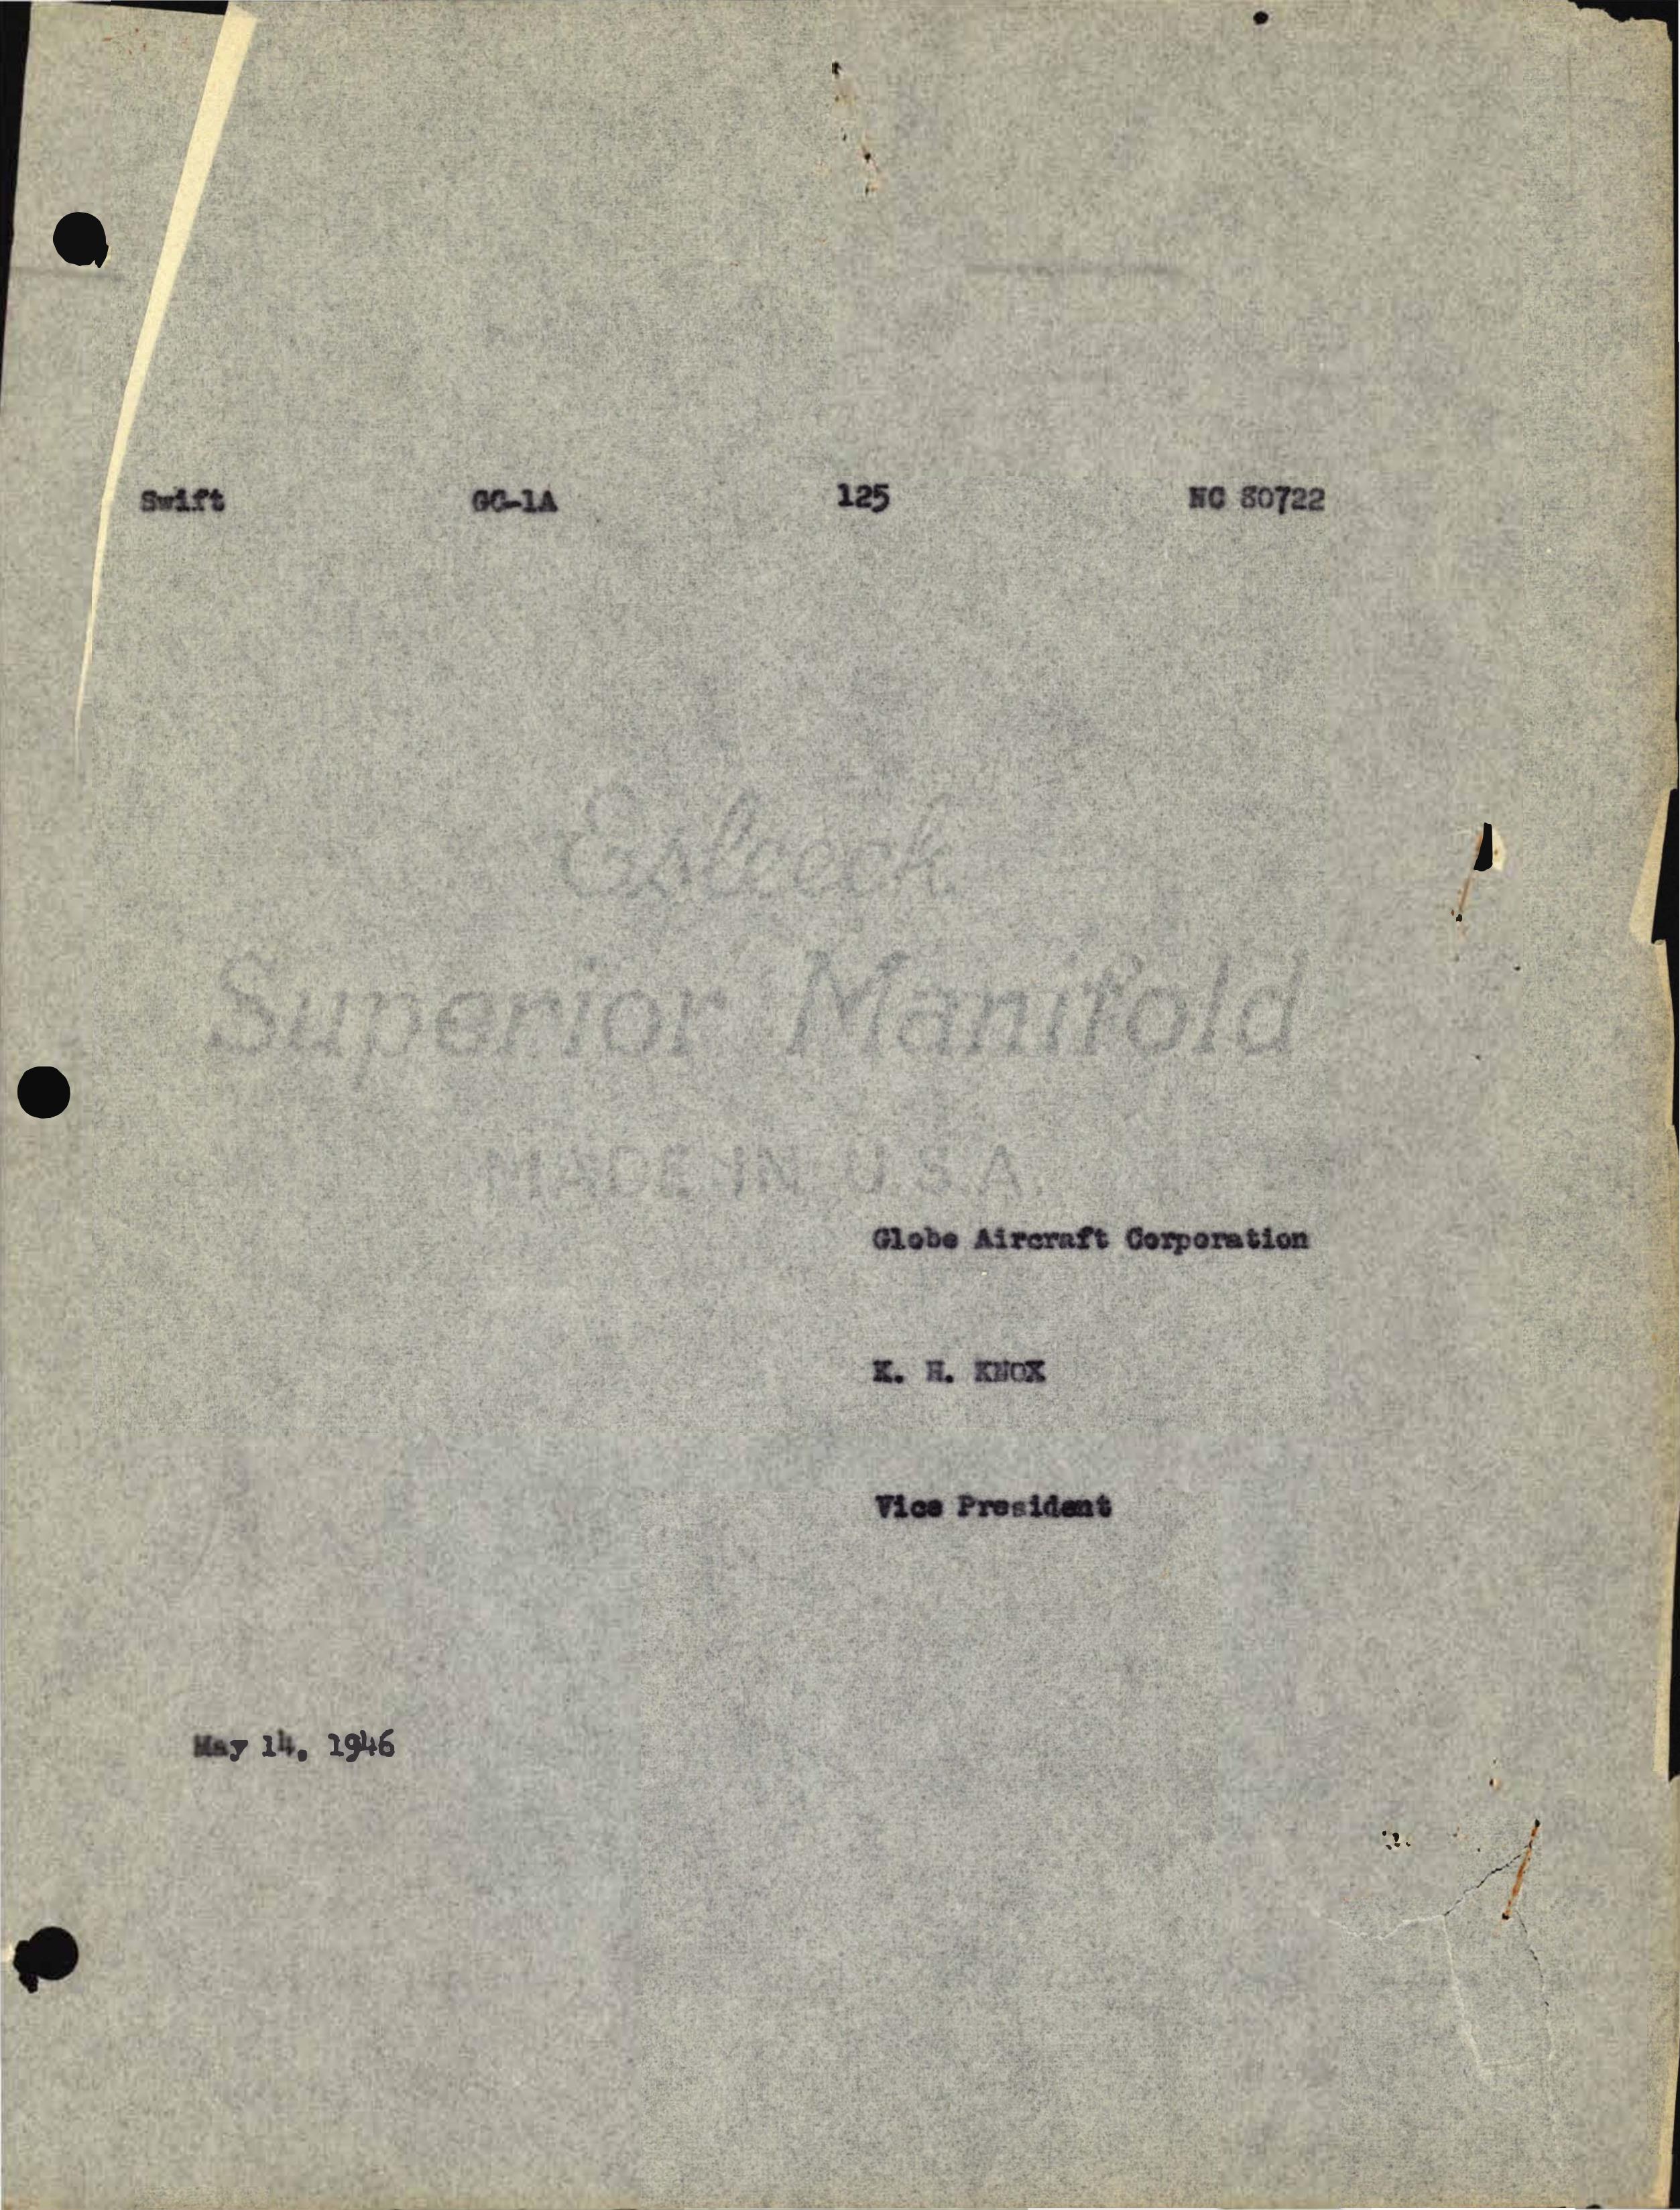 Sample page 3 from AirCorps Library document: Technical Information for Serial Number 125